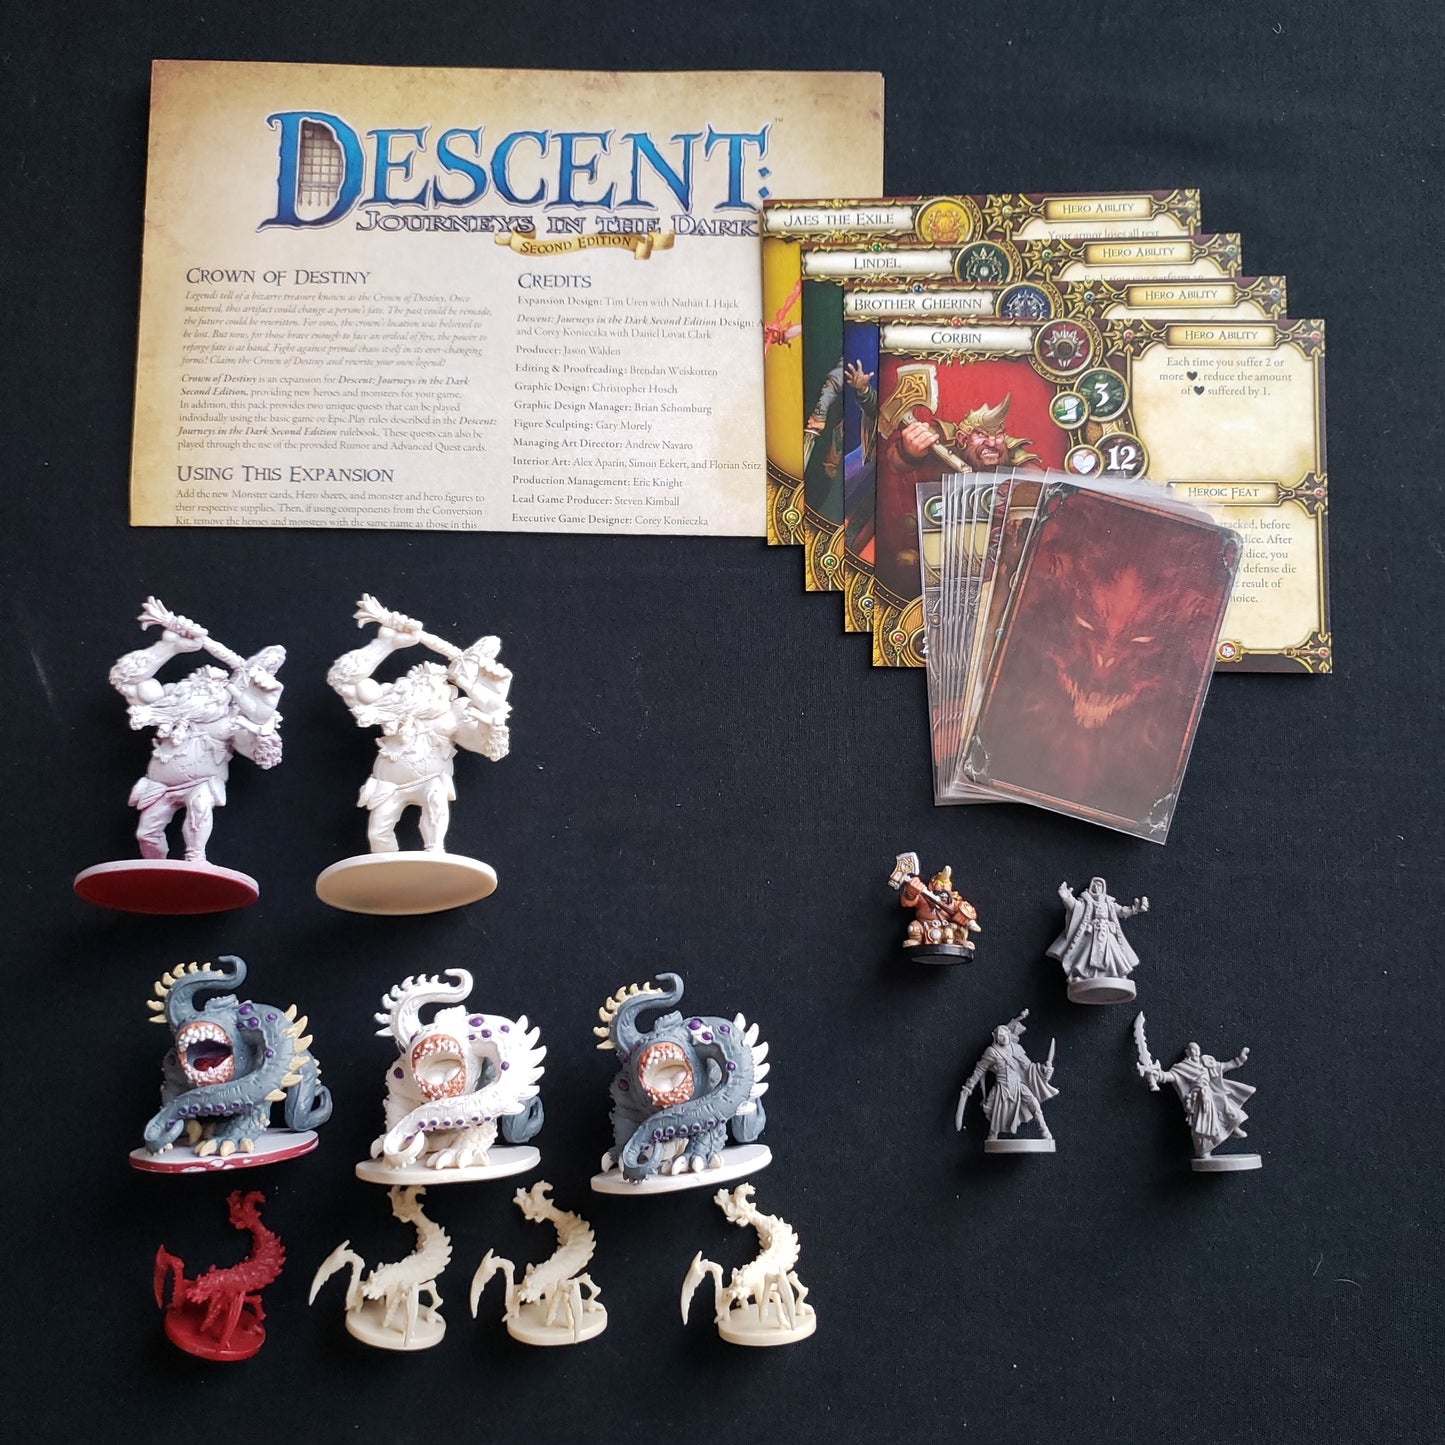 Image shows the components & instructions for the Crown Of Destiny expansion for the board game Descent: Journeys in the Dark Second Edition